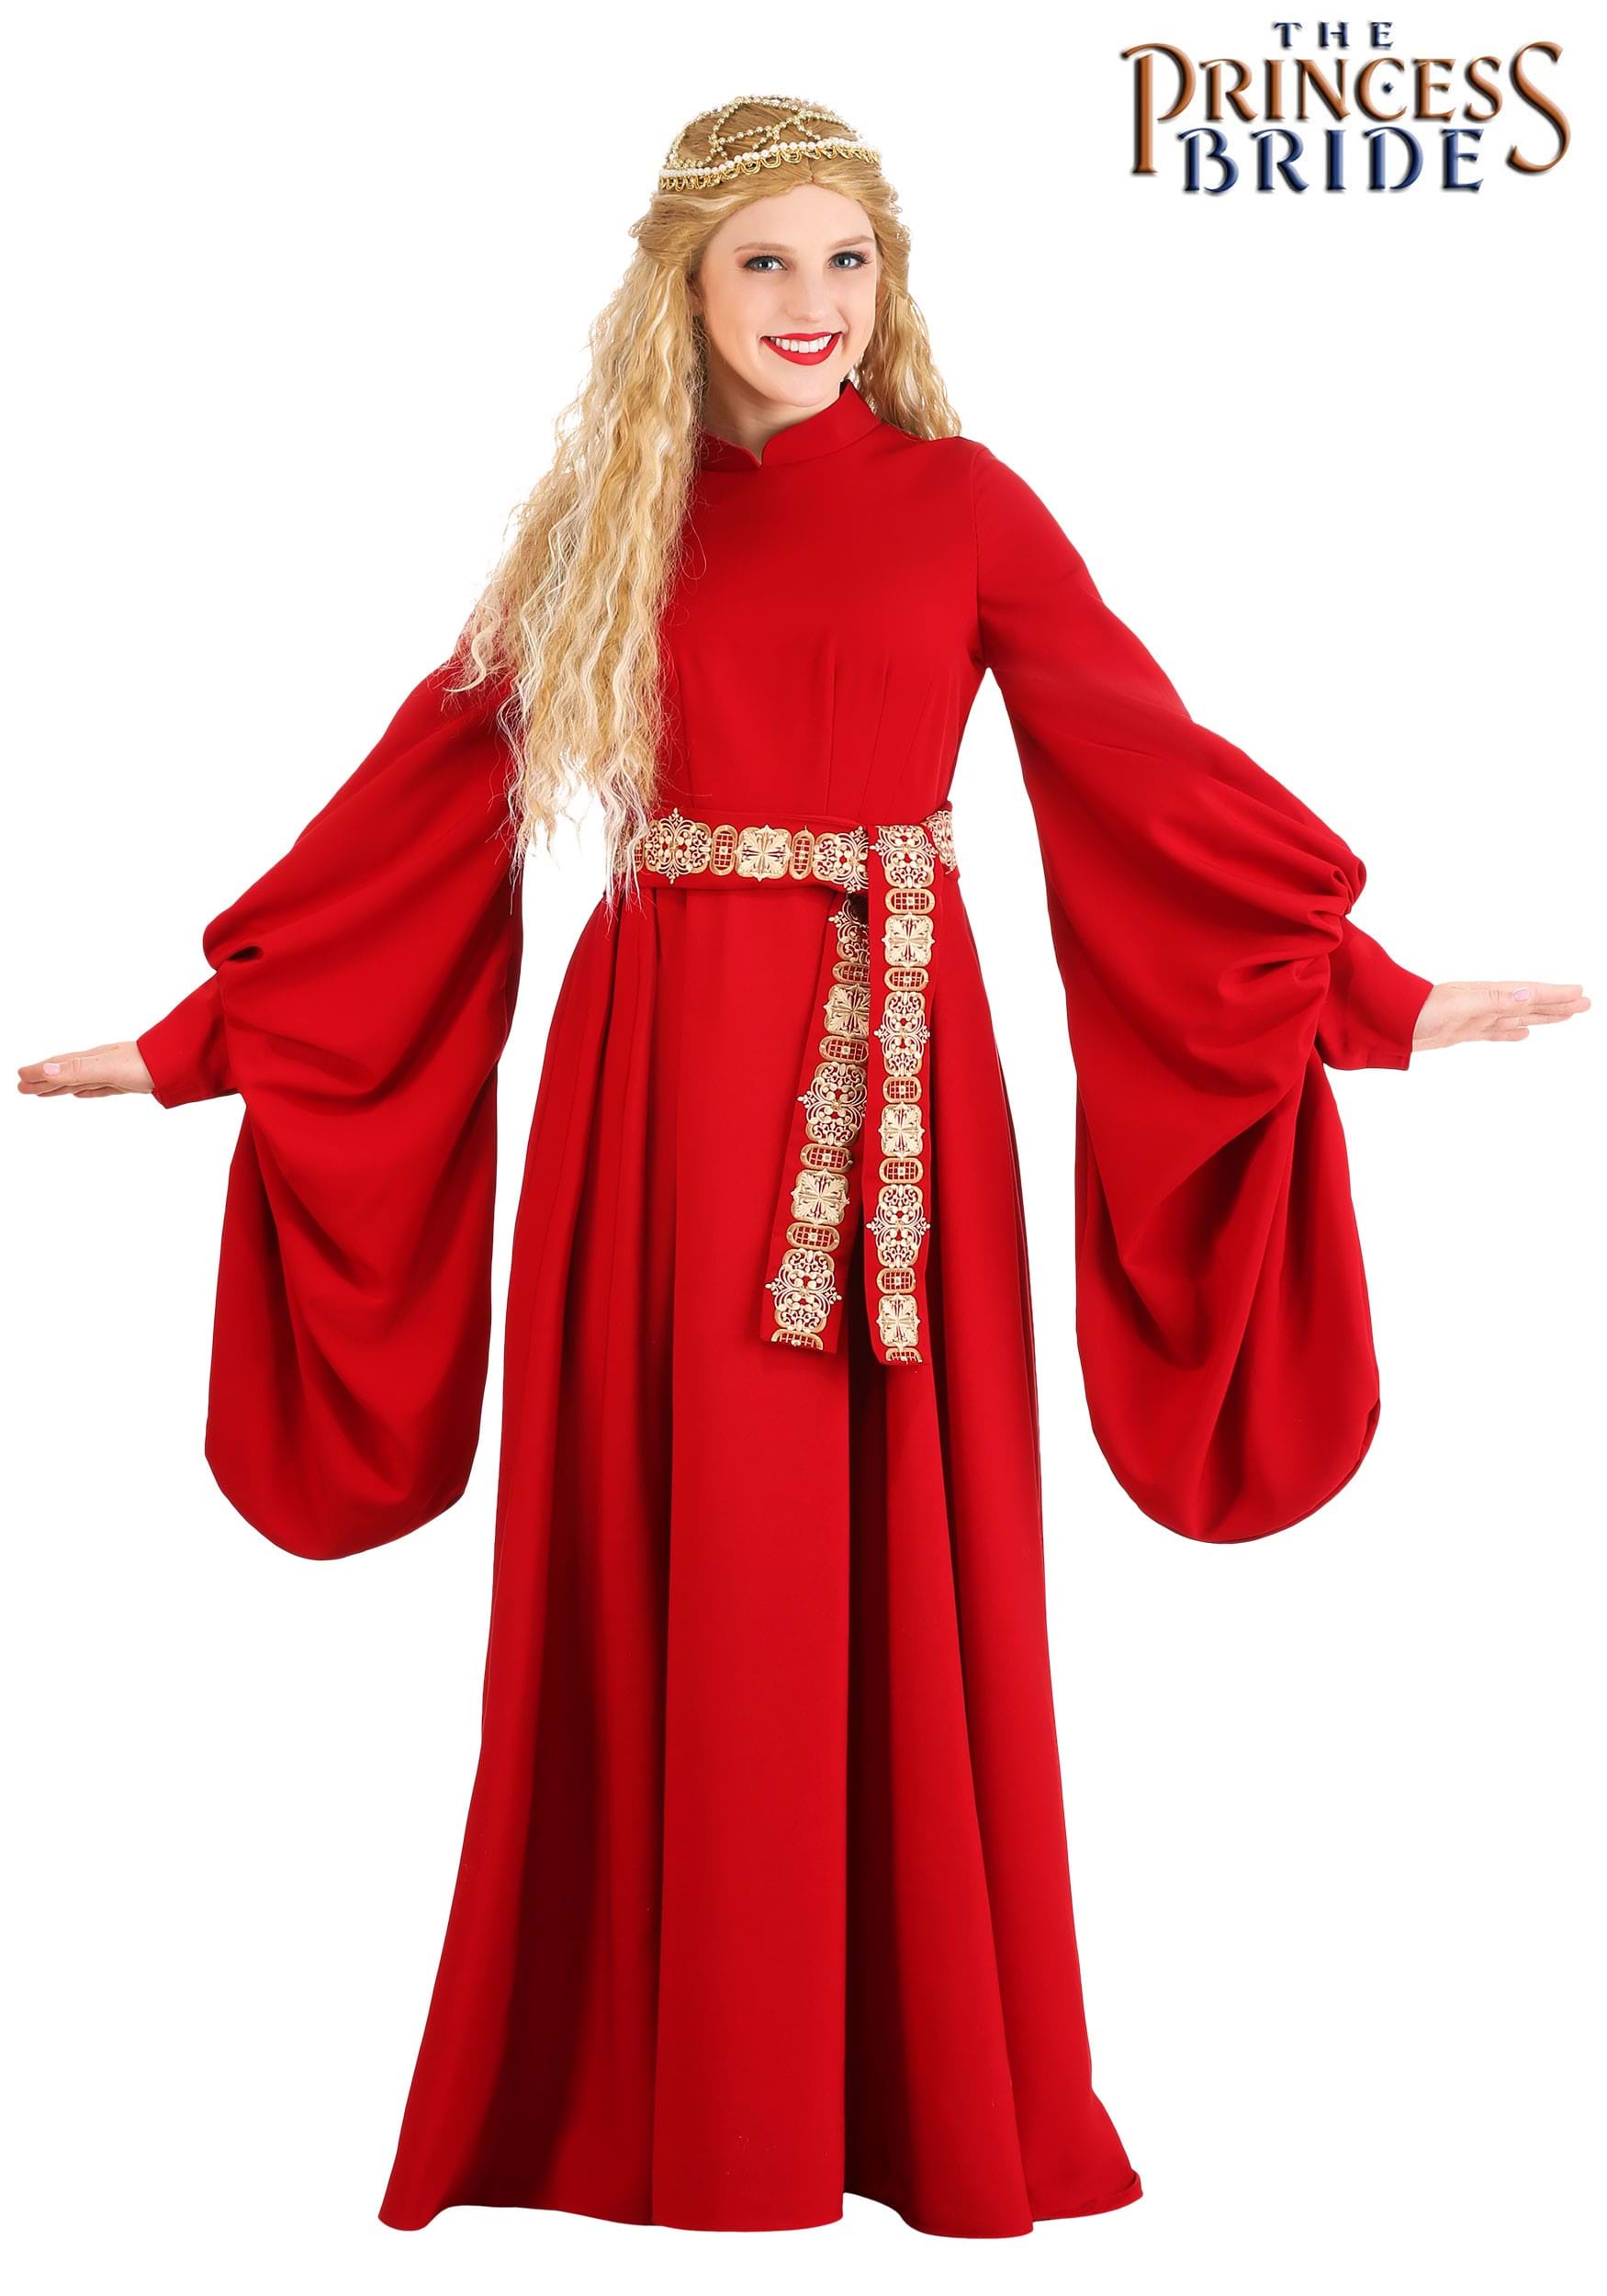 https://images.halloweencostumes.com/products/54408/1-1/the-princess-bride-authentic-buttercup-adult-costume-0.jpg